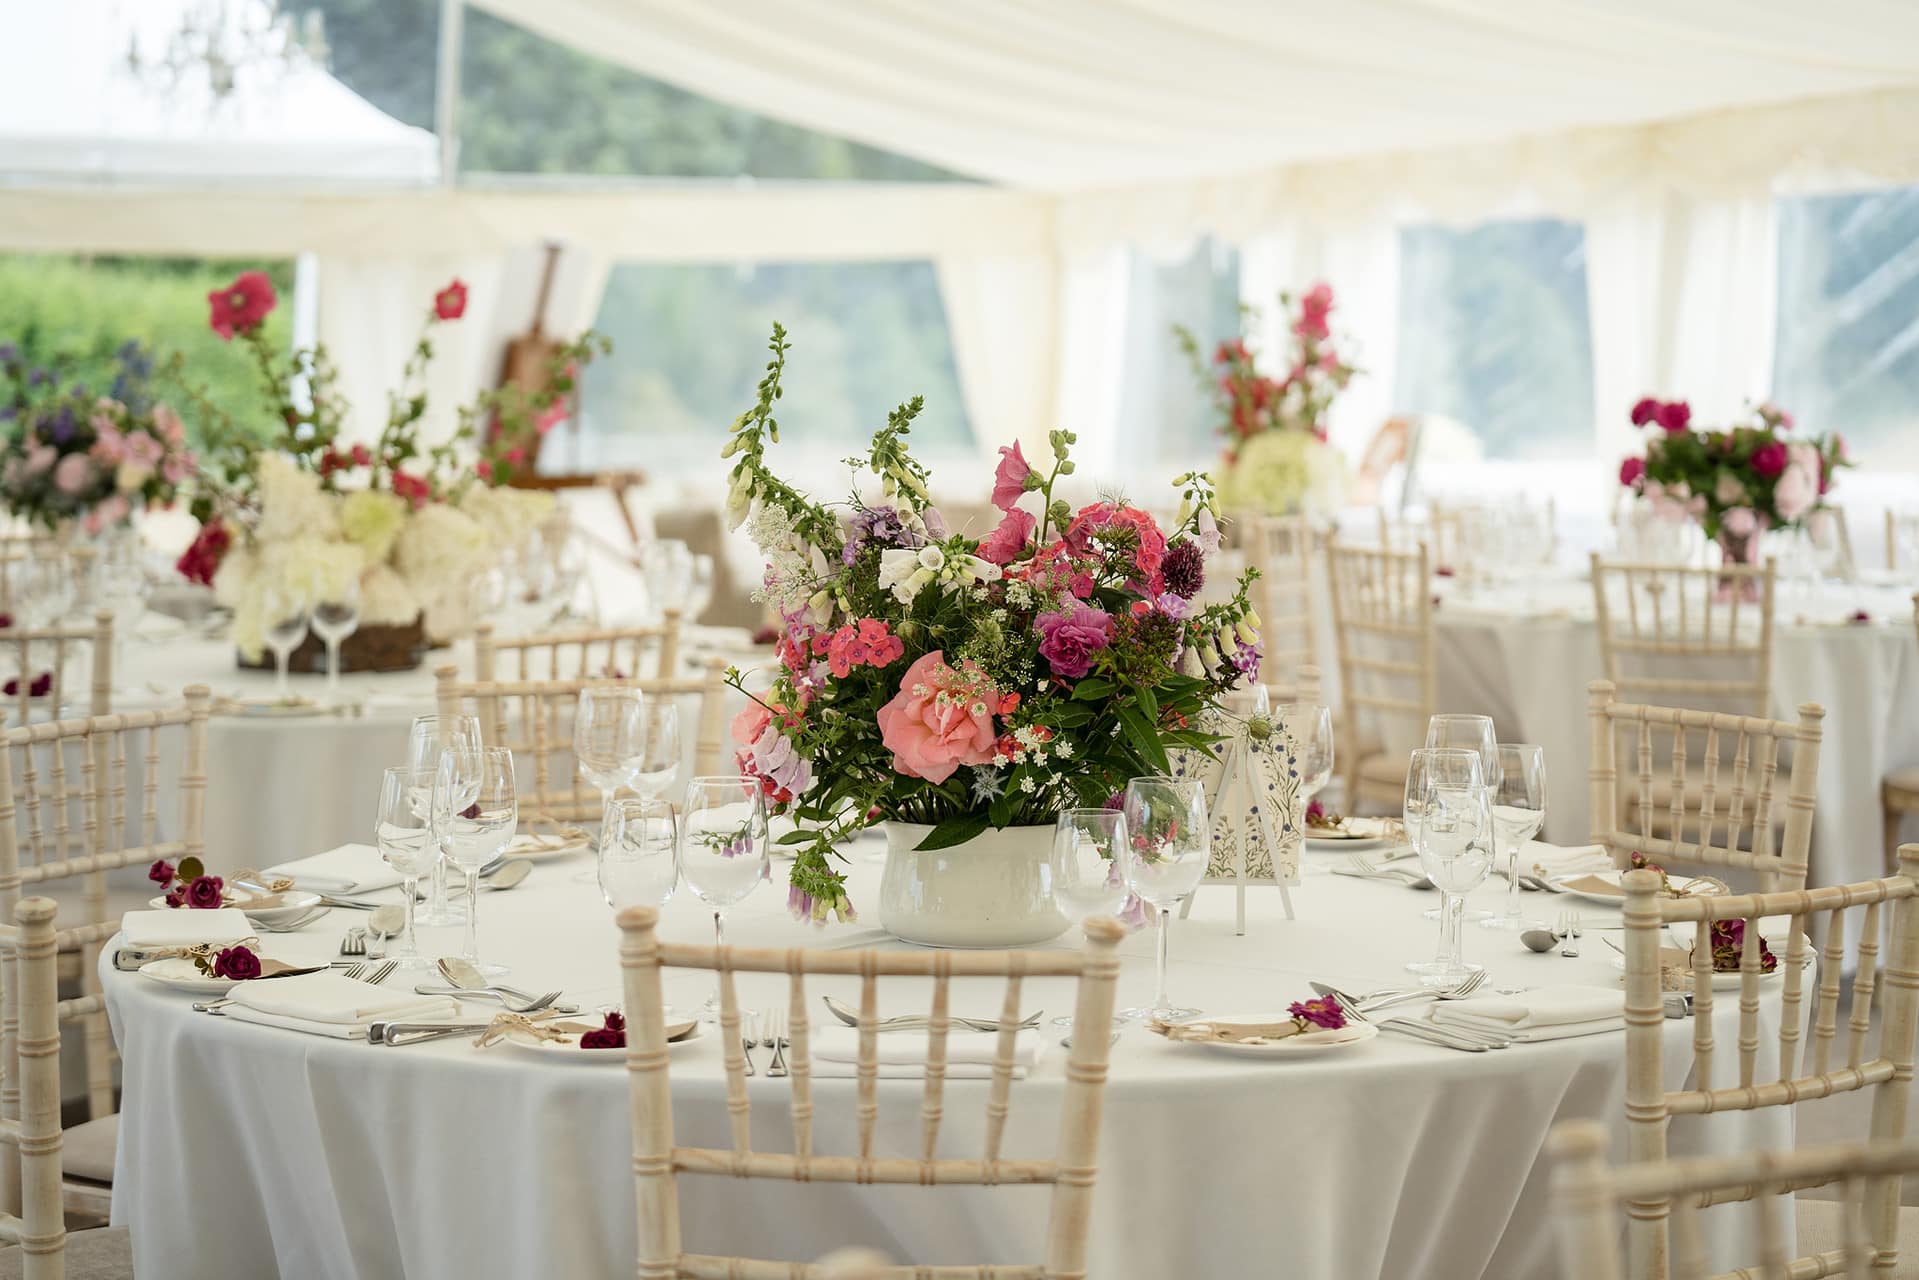 Country style flower table centrepieces for a marquee wedding